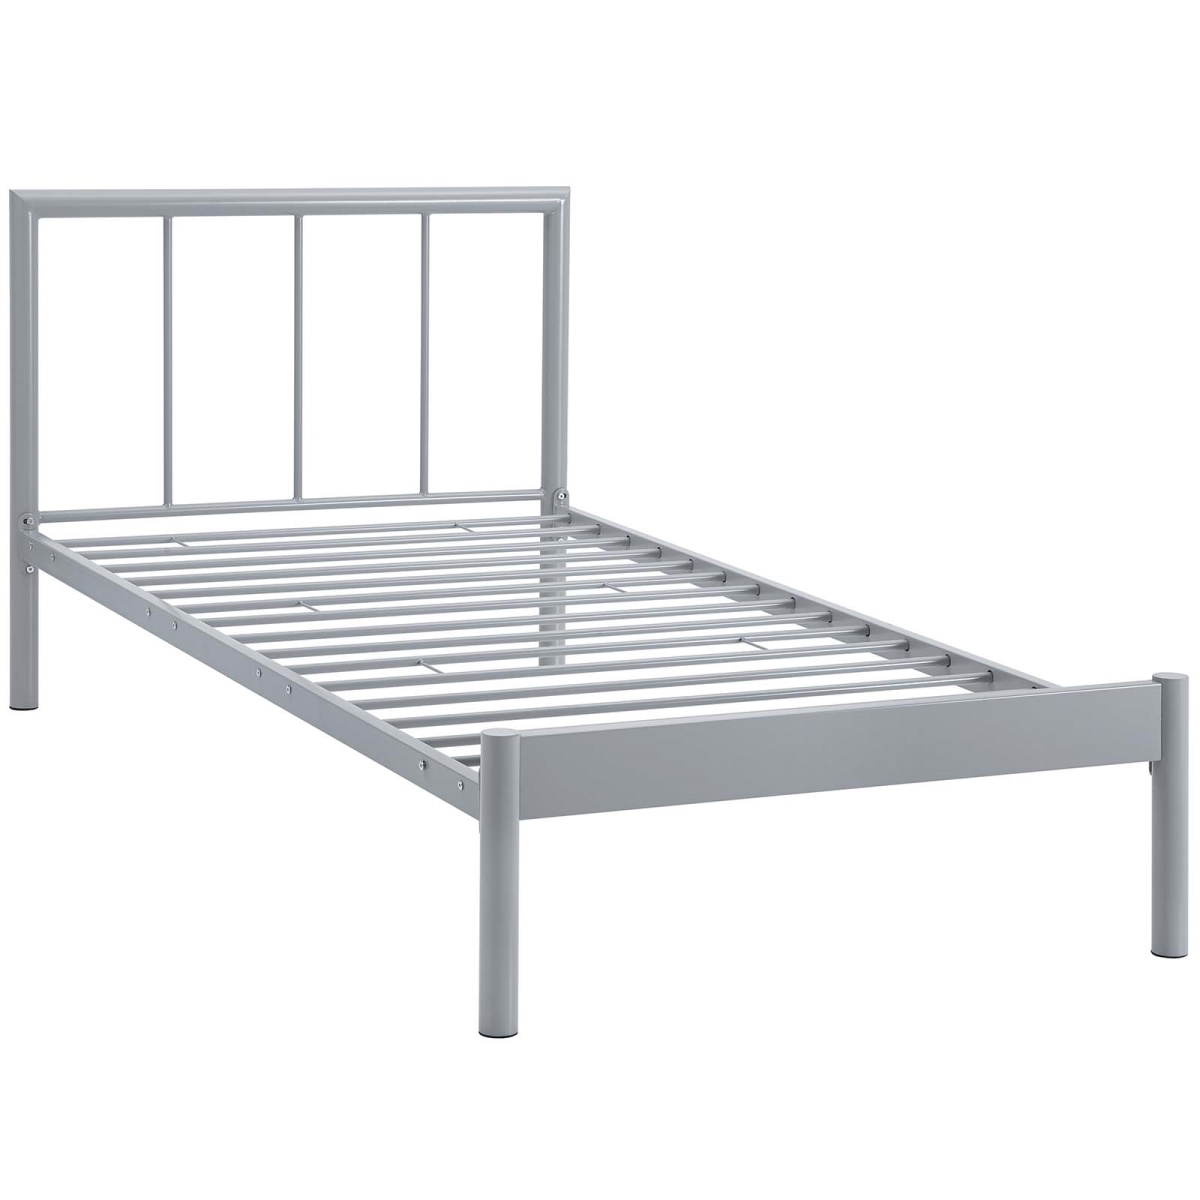 Mod-5543-gry-set 35.5 X 42 In. Gwen Twin Bed Frame - Gray